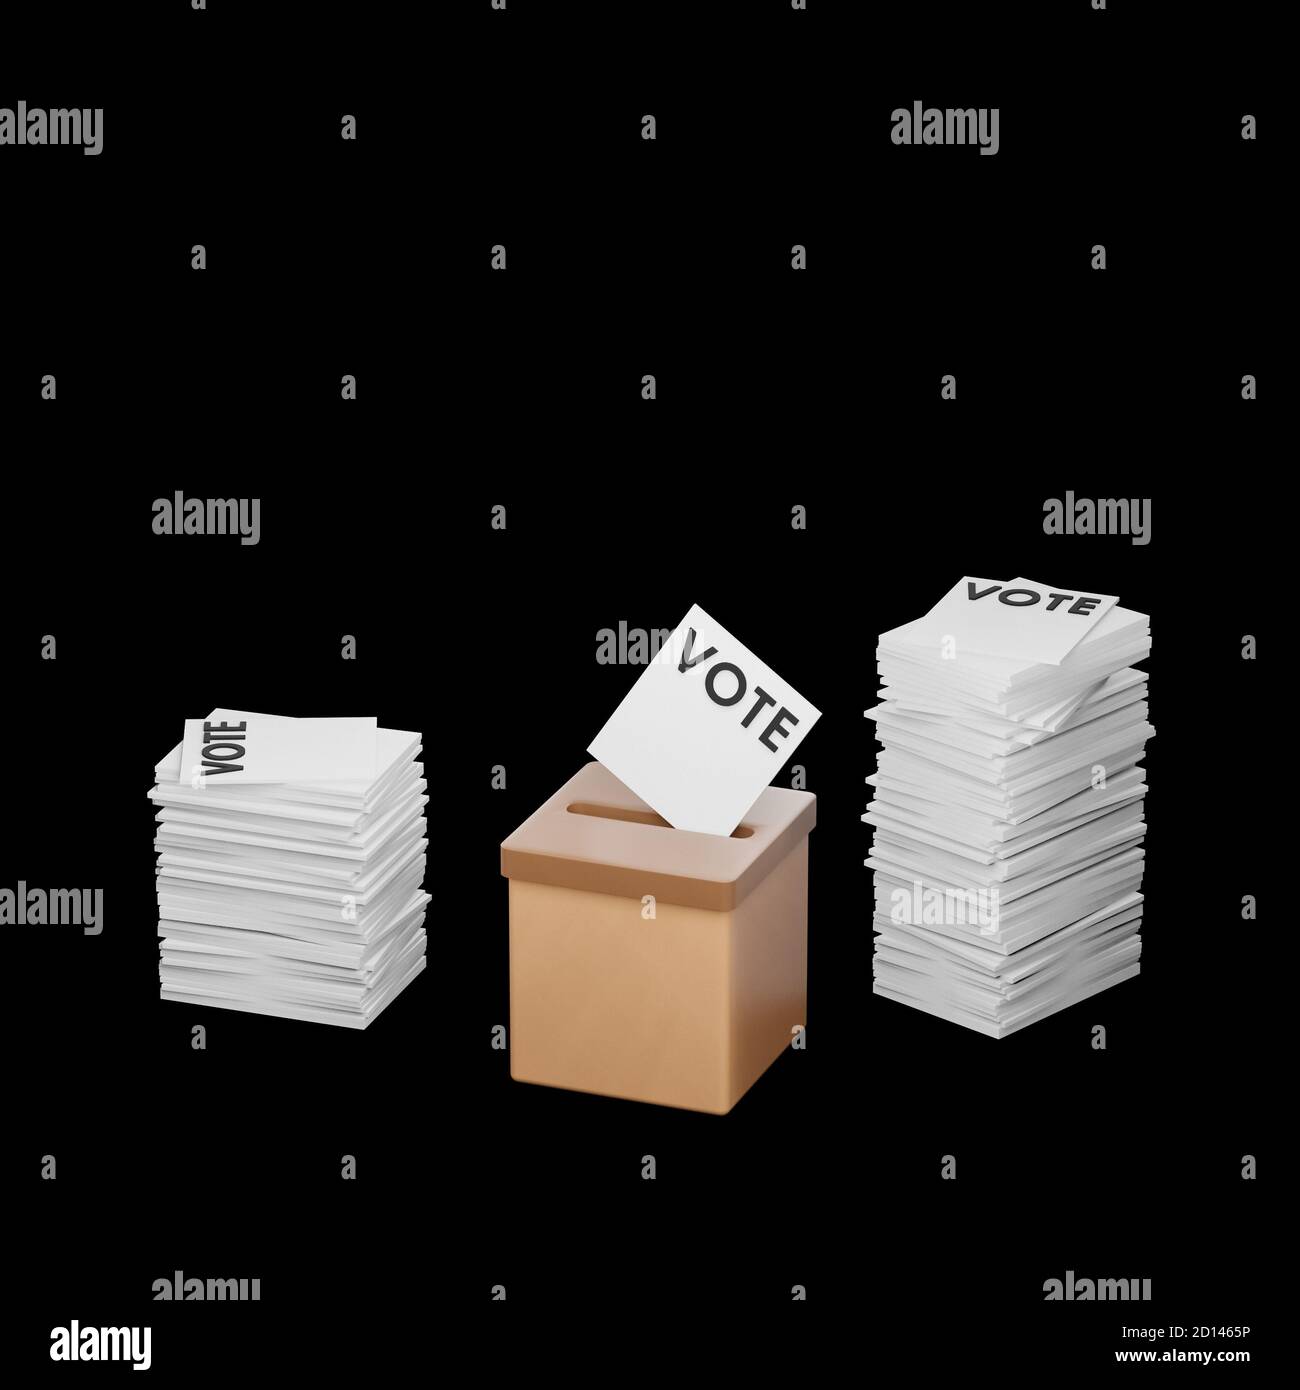 Ballot box, inserting voting paper, democratic general election, 3d illustration, cgi rendering, visualization, black background, copy space Stock Photo